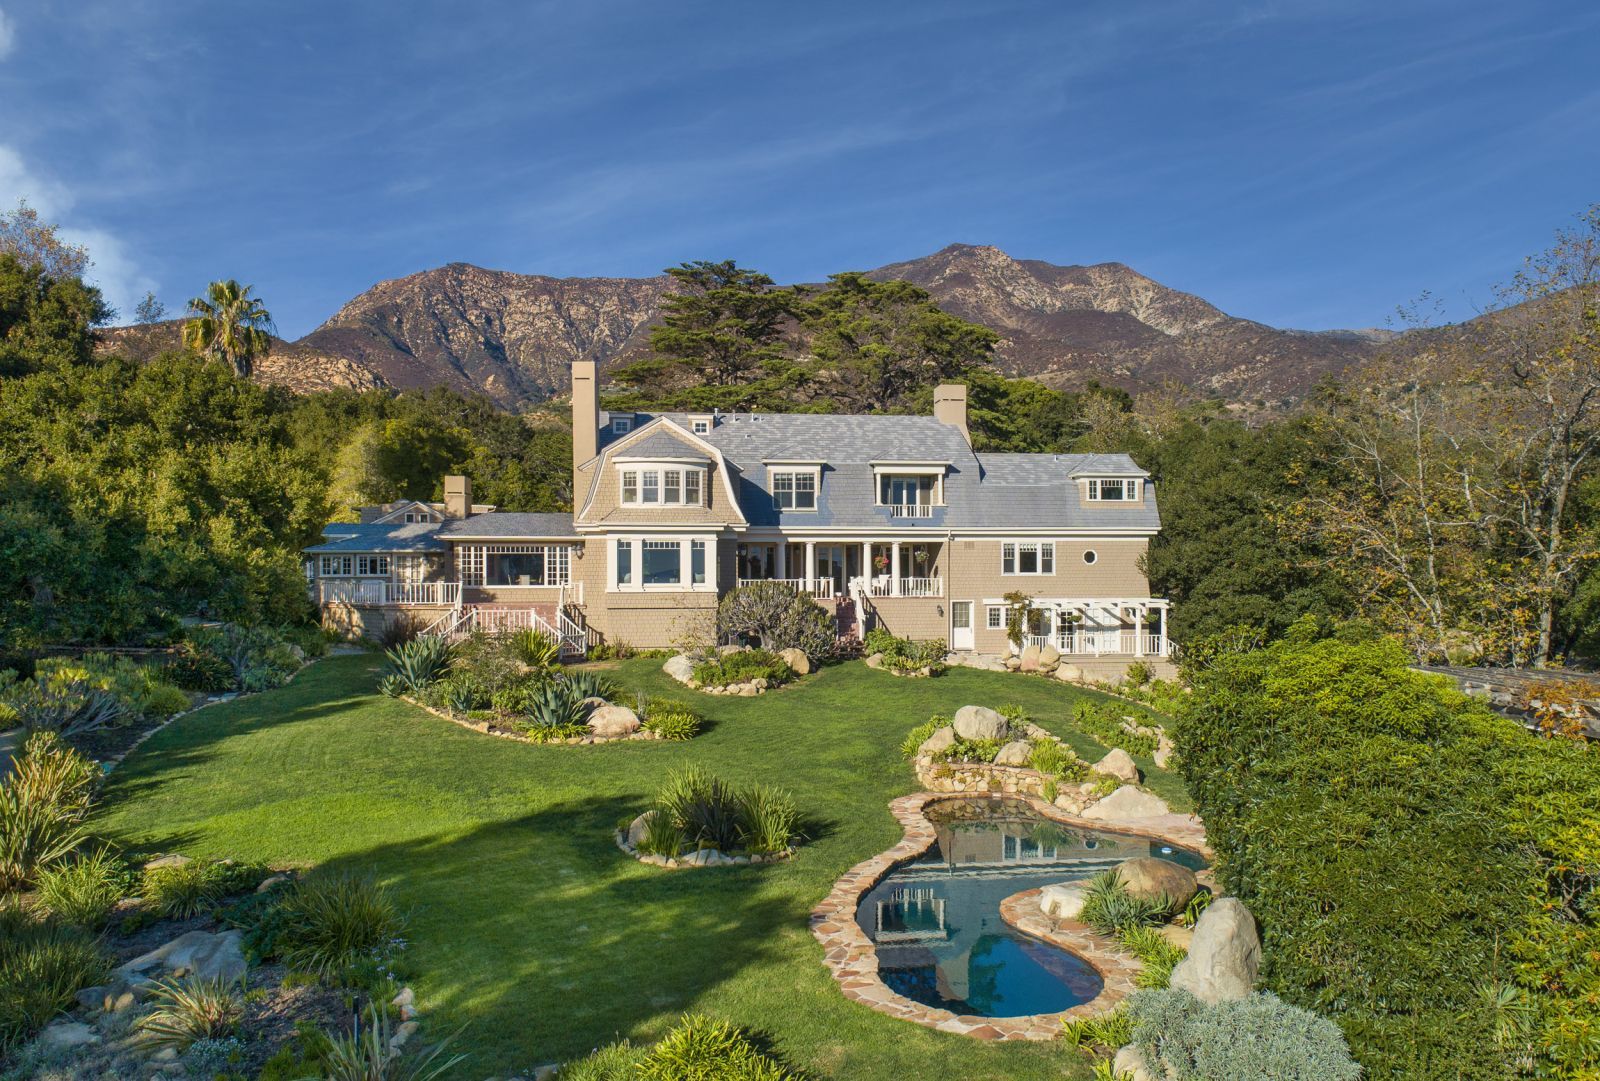 A Cape Cod-style home on a Montecito estate, with a pool, lush greenery, and mountains in the background.